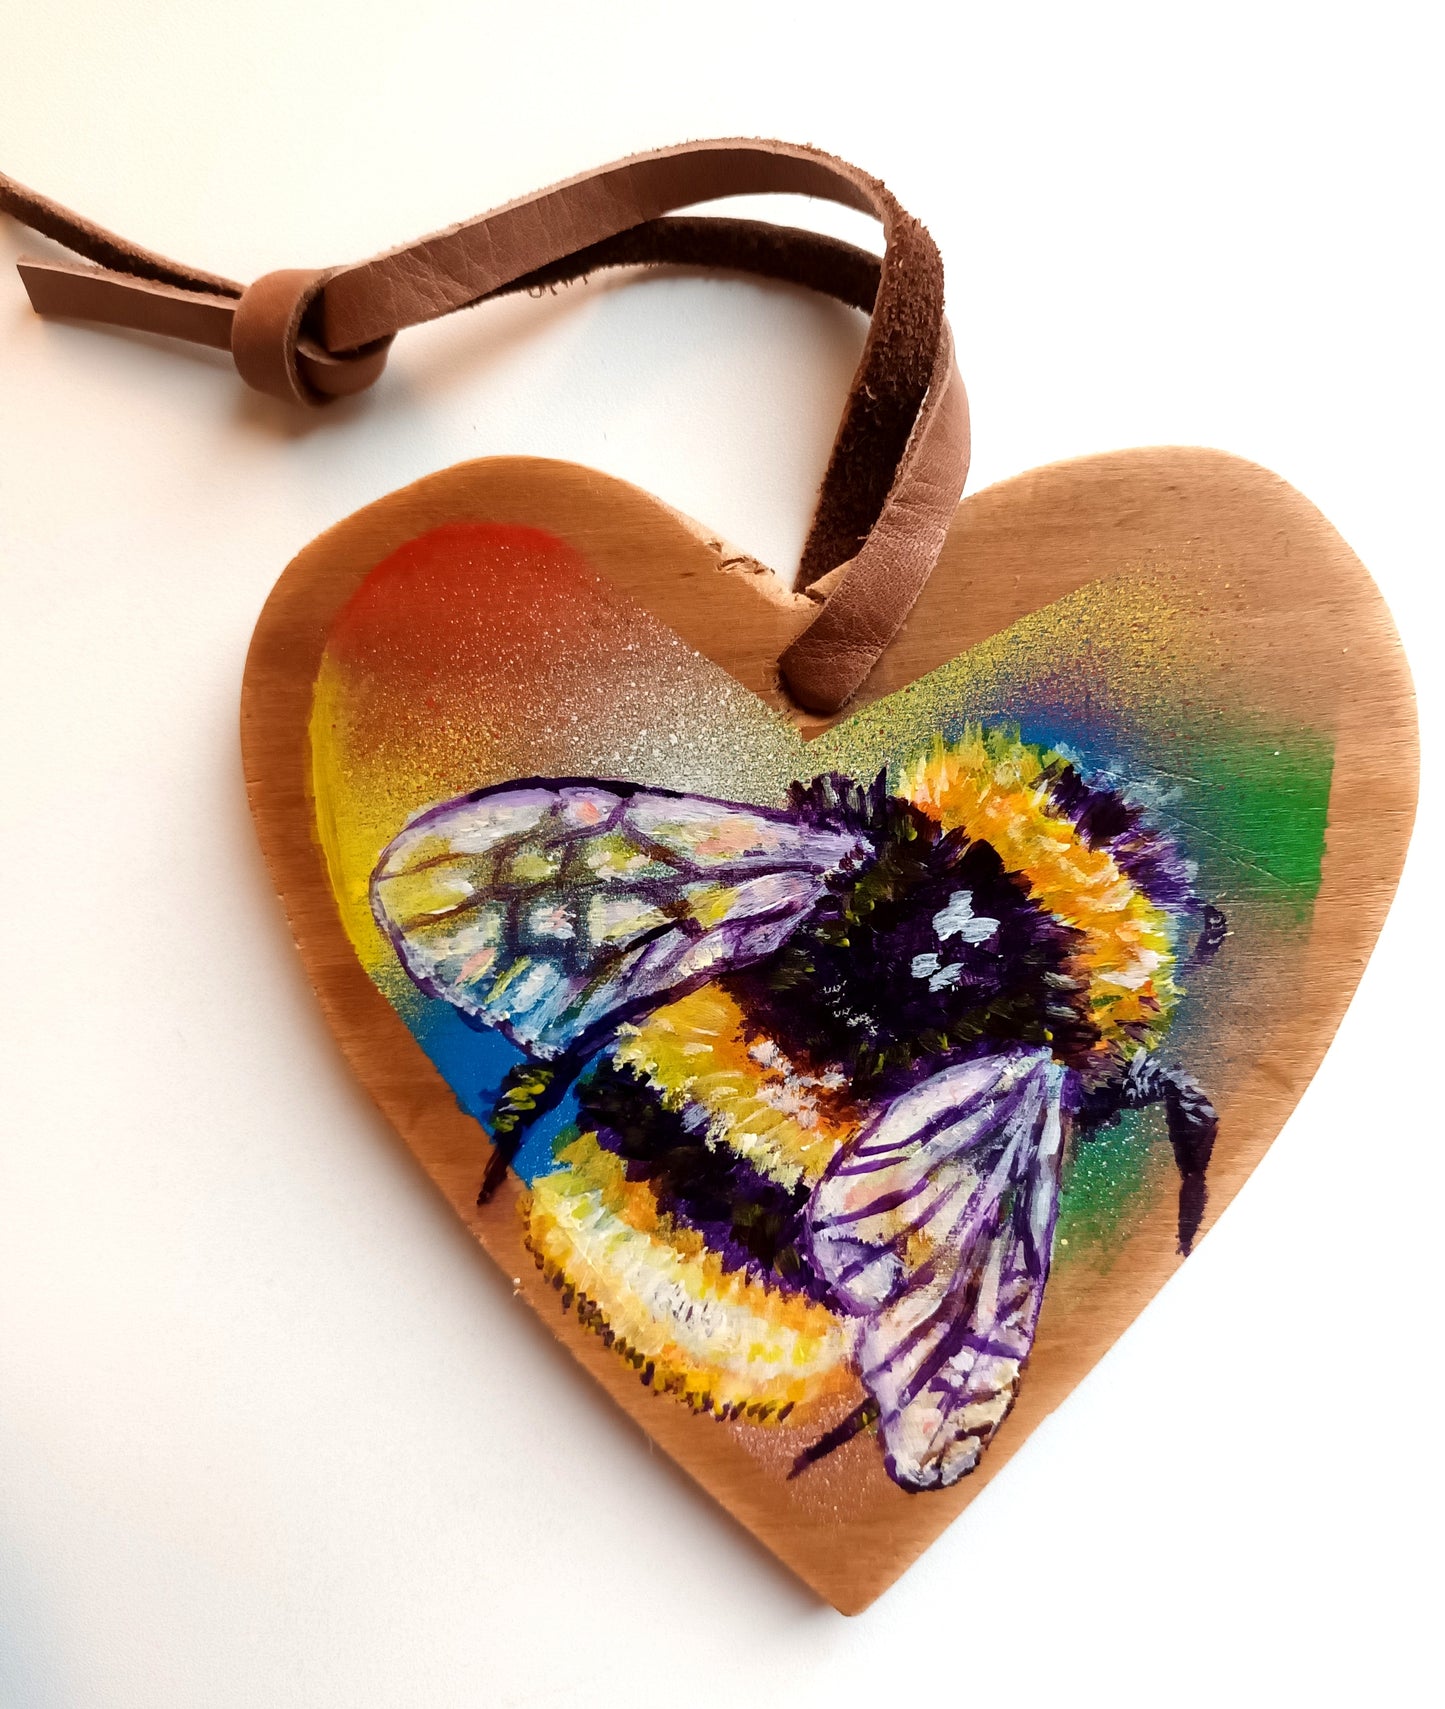 "Bee magic" Painting on a wooden heart